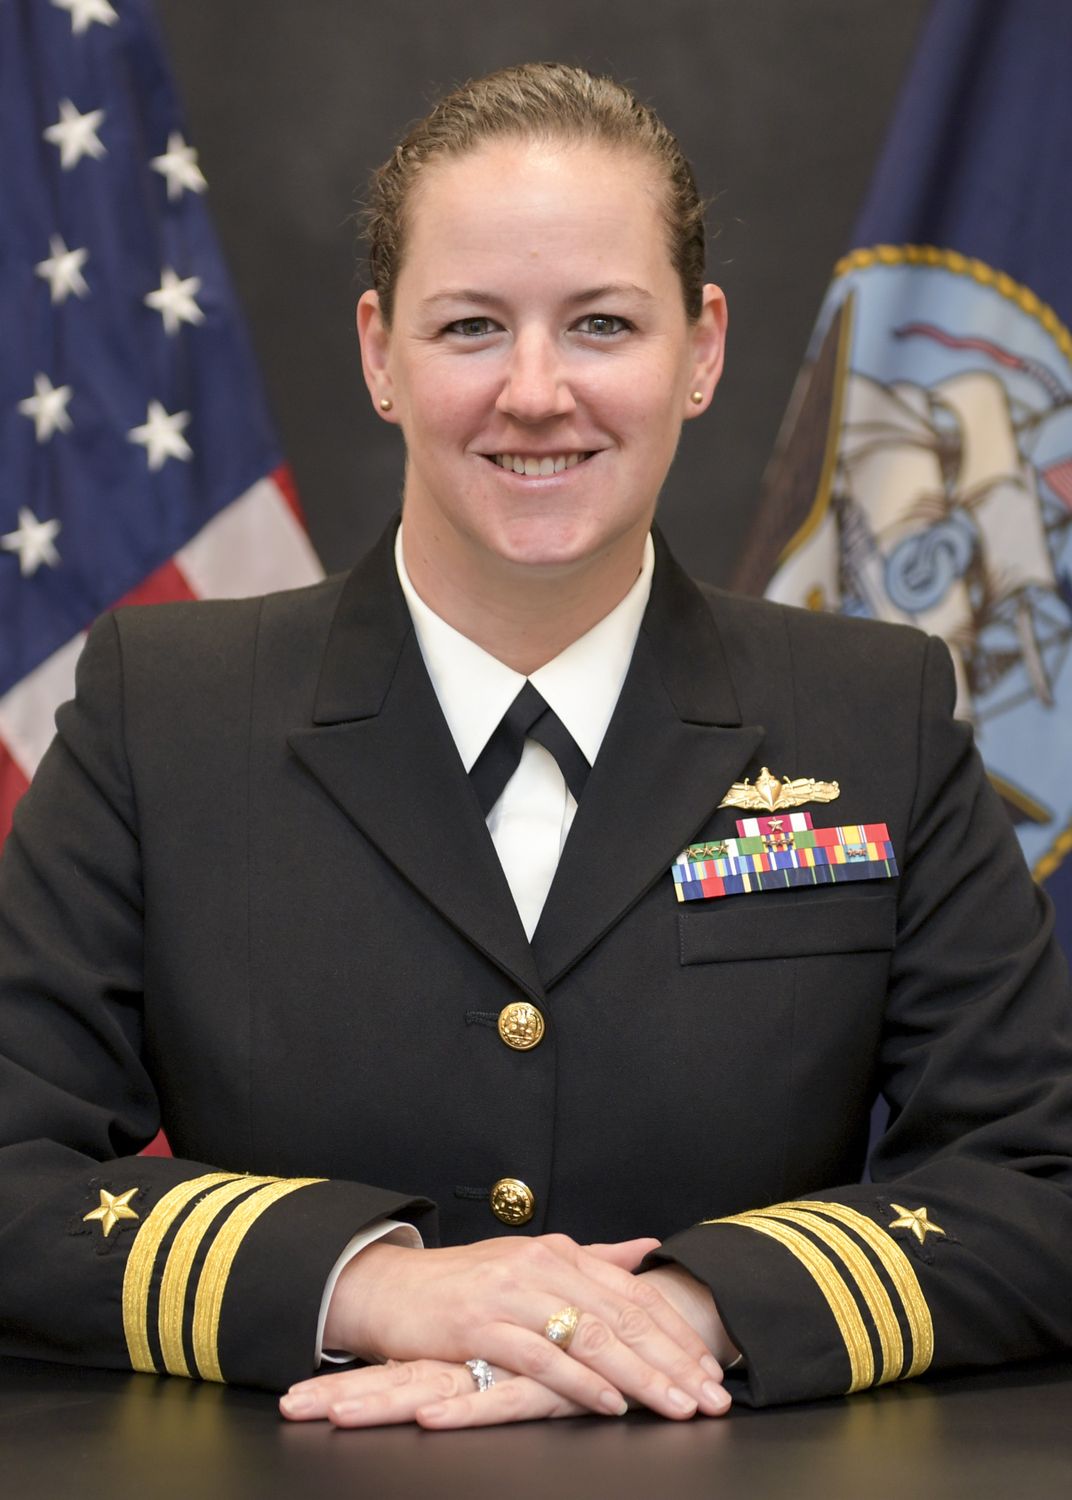 Young woman in black navy dress uniform smiling in front of the U.S. flag